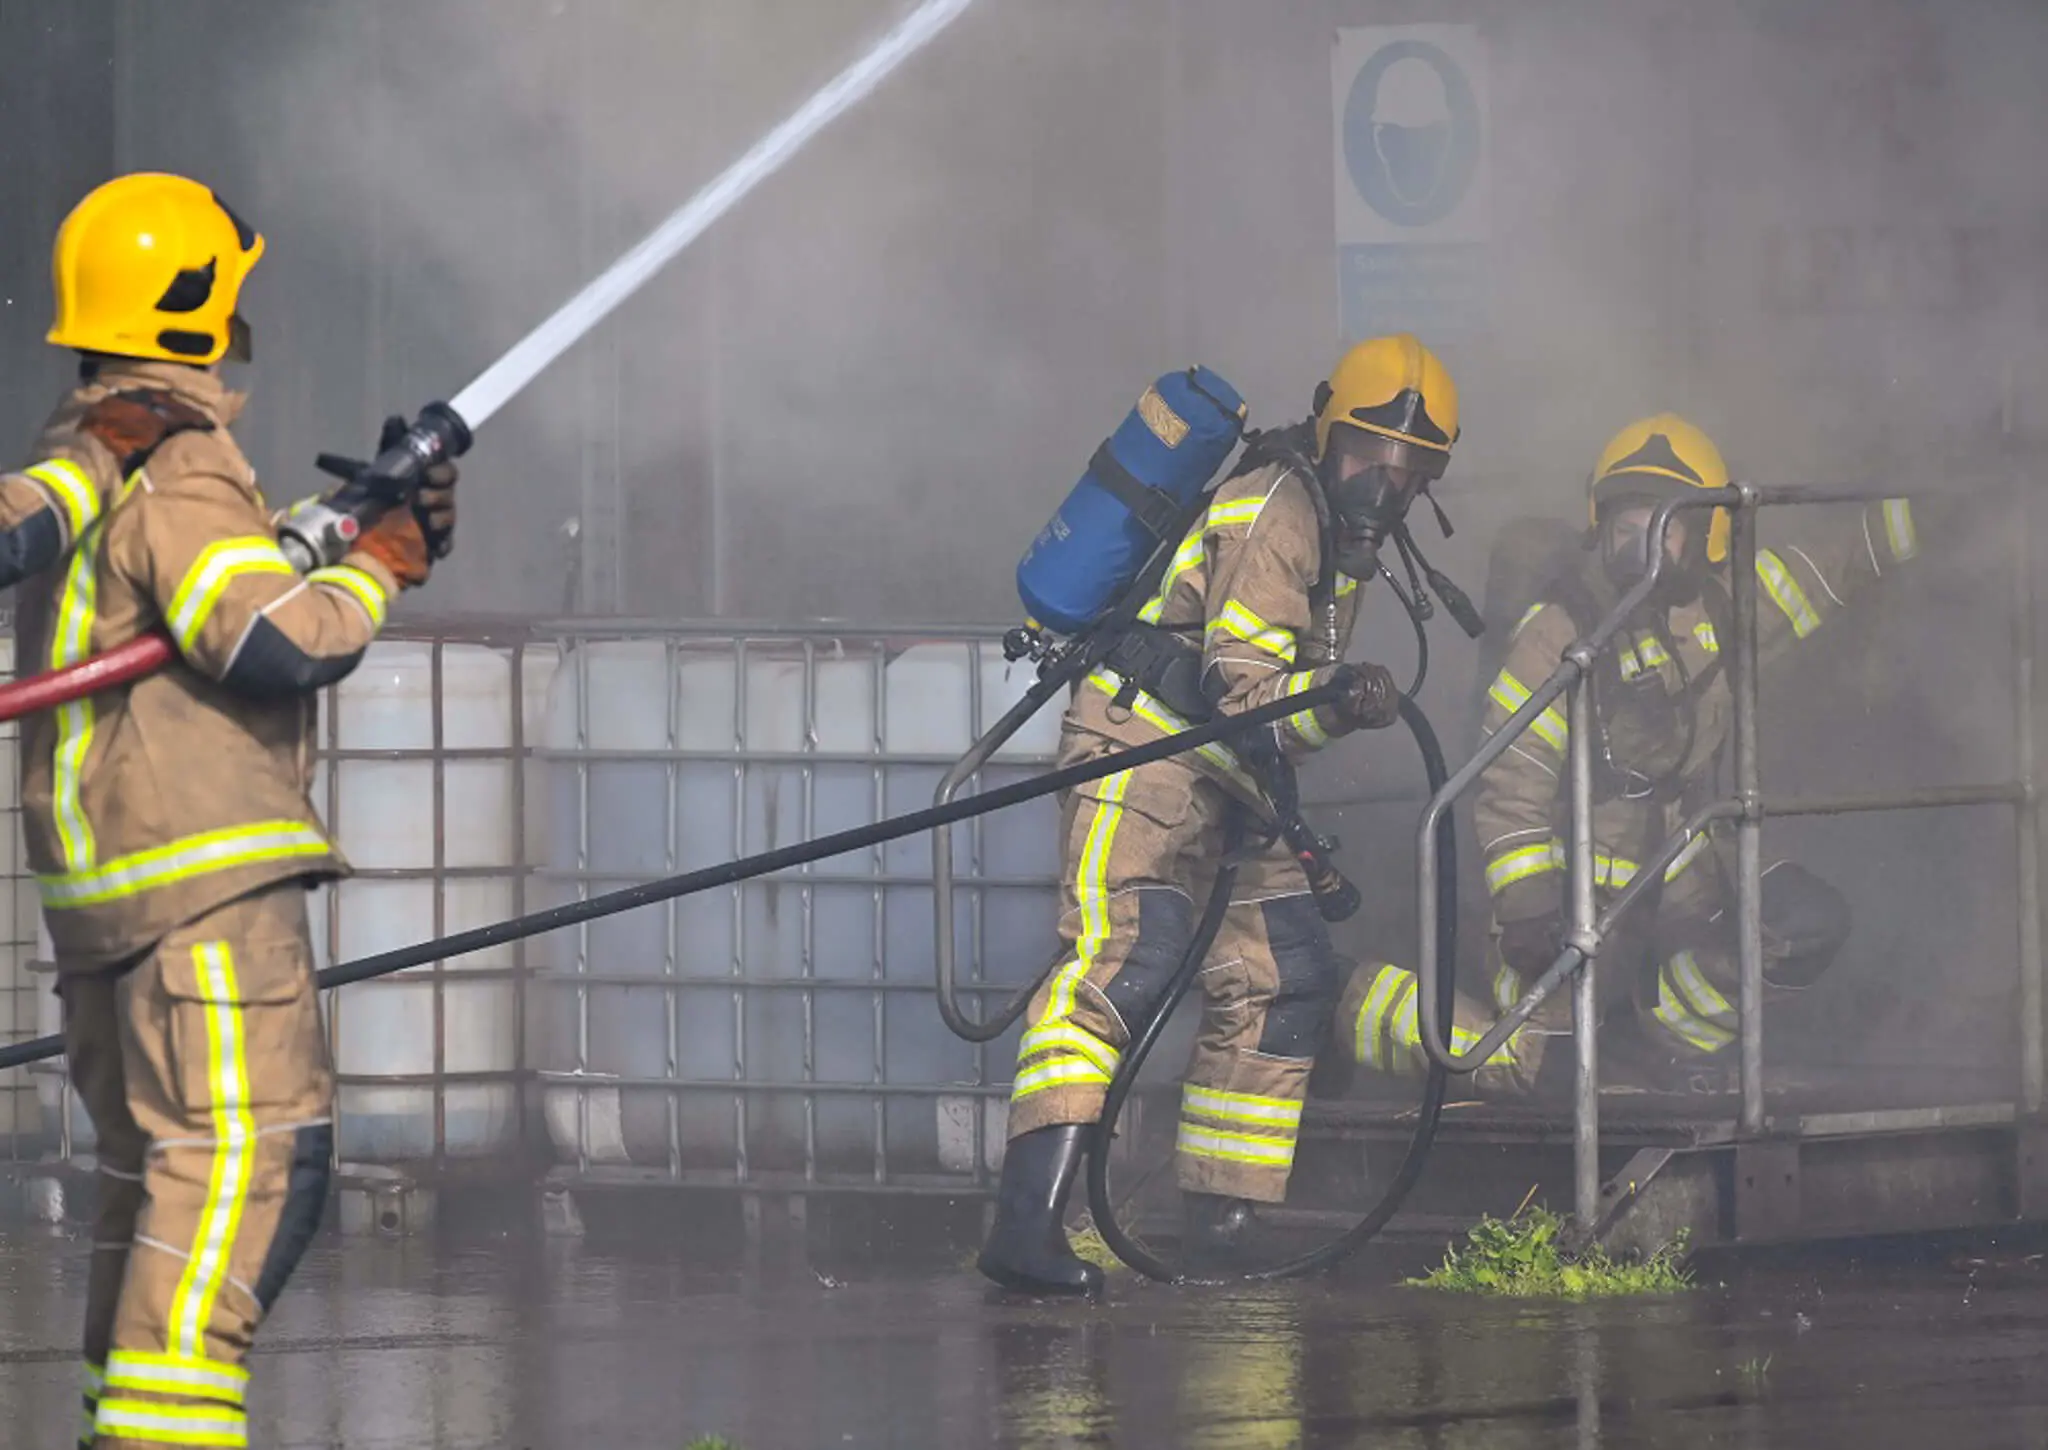 Firefighters in training with fire hose